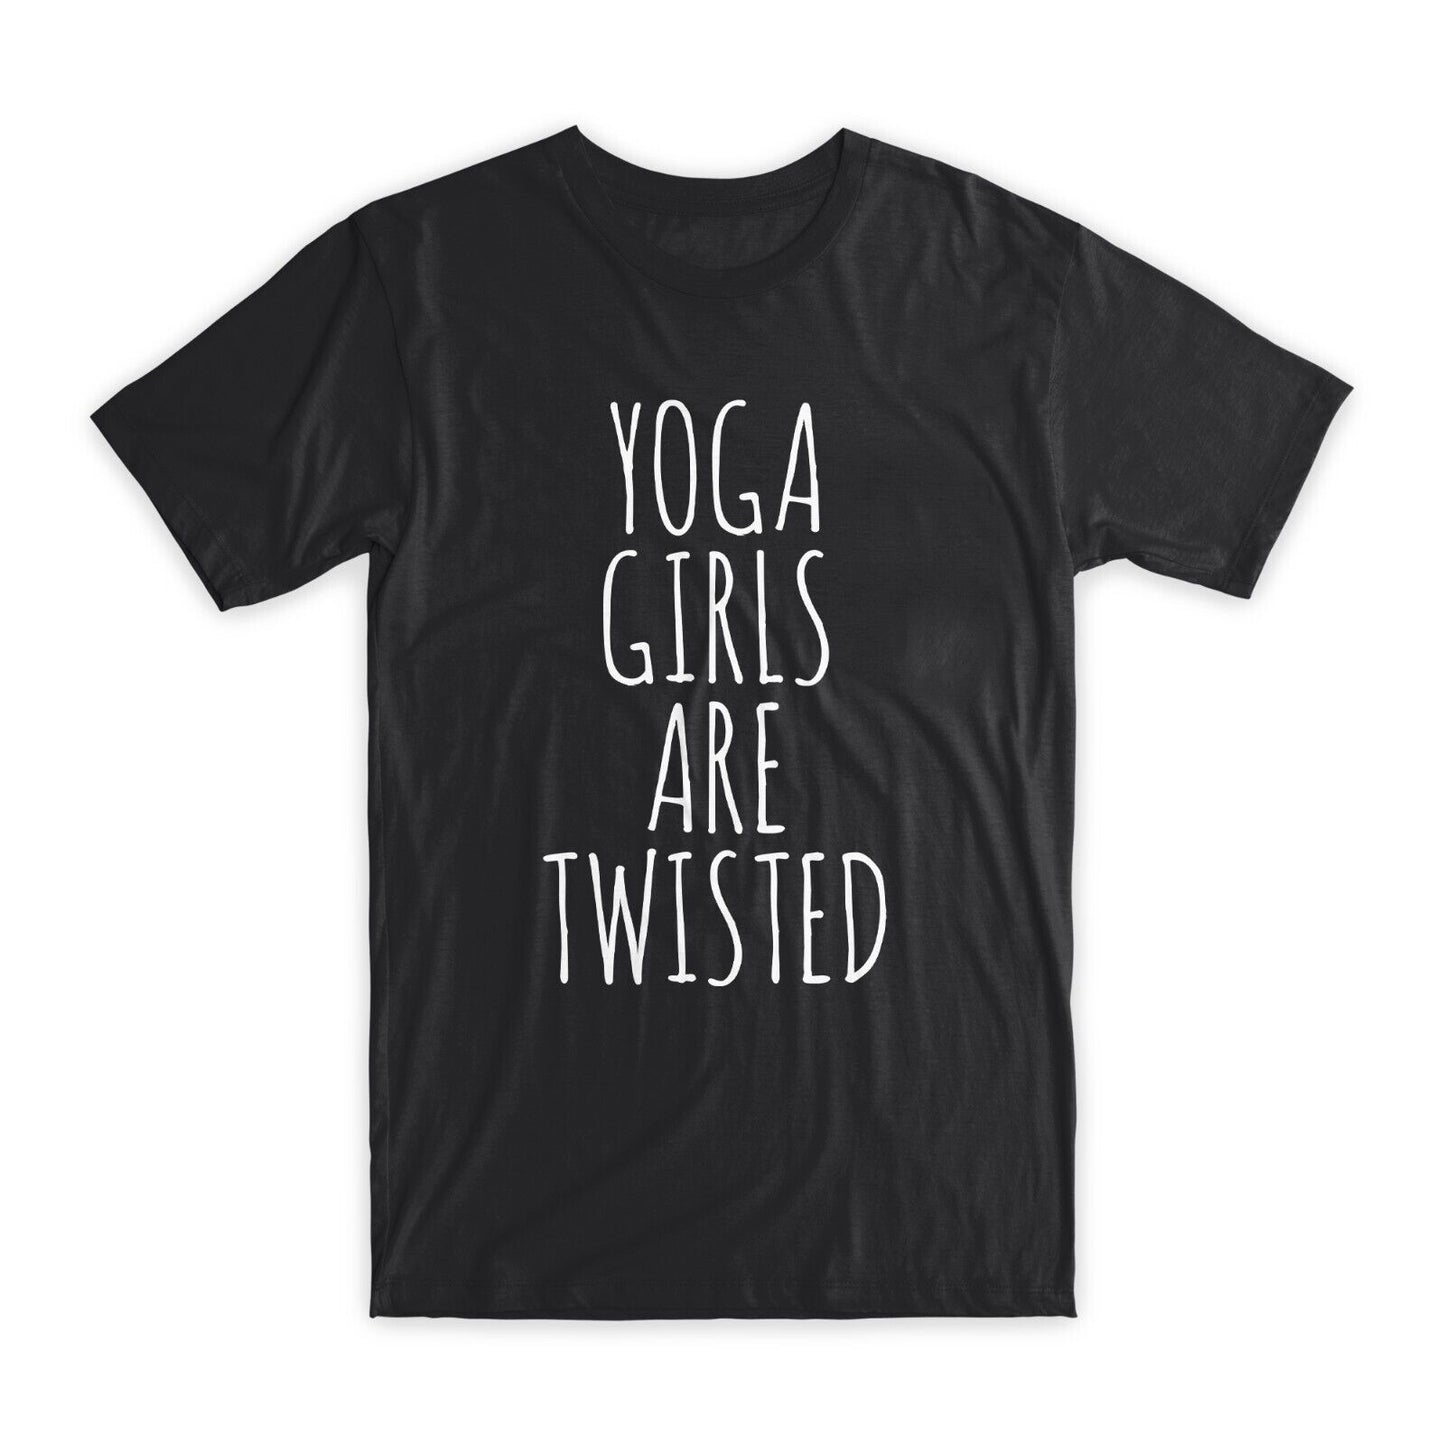 Yoga Girls Are Twisted T-Shirt Premium Soft Cotton Crew Neck Funny Tee Gifts NEW